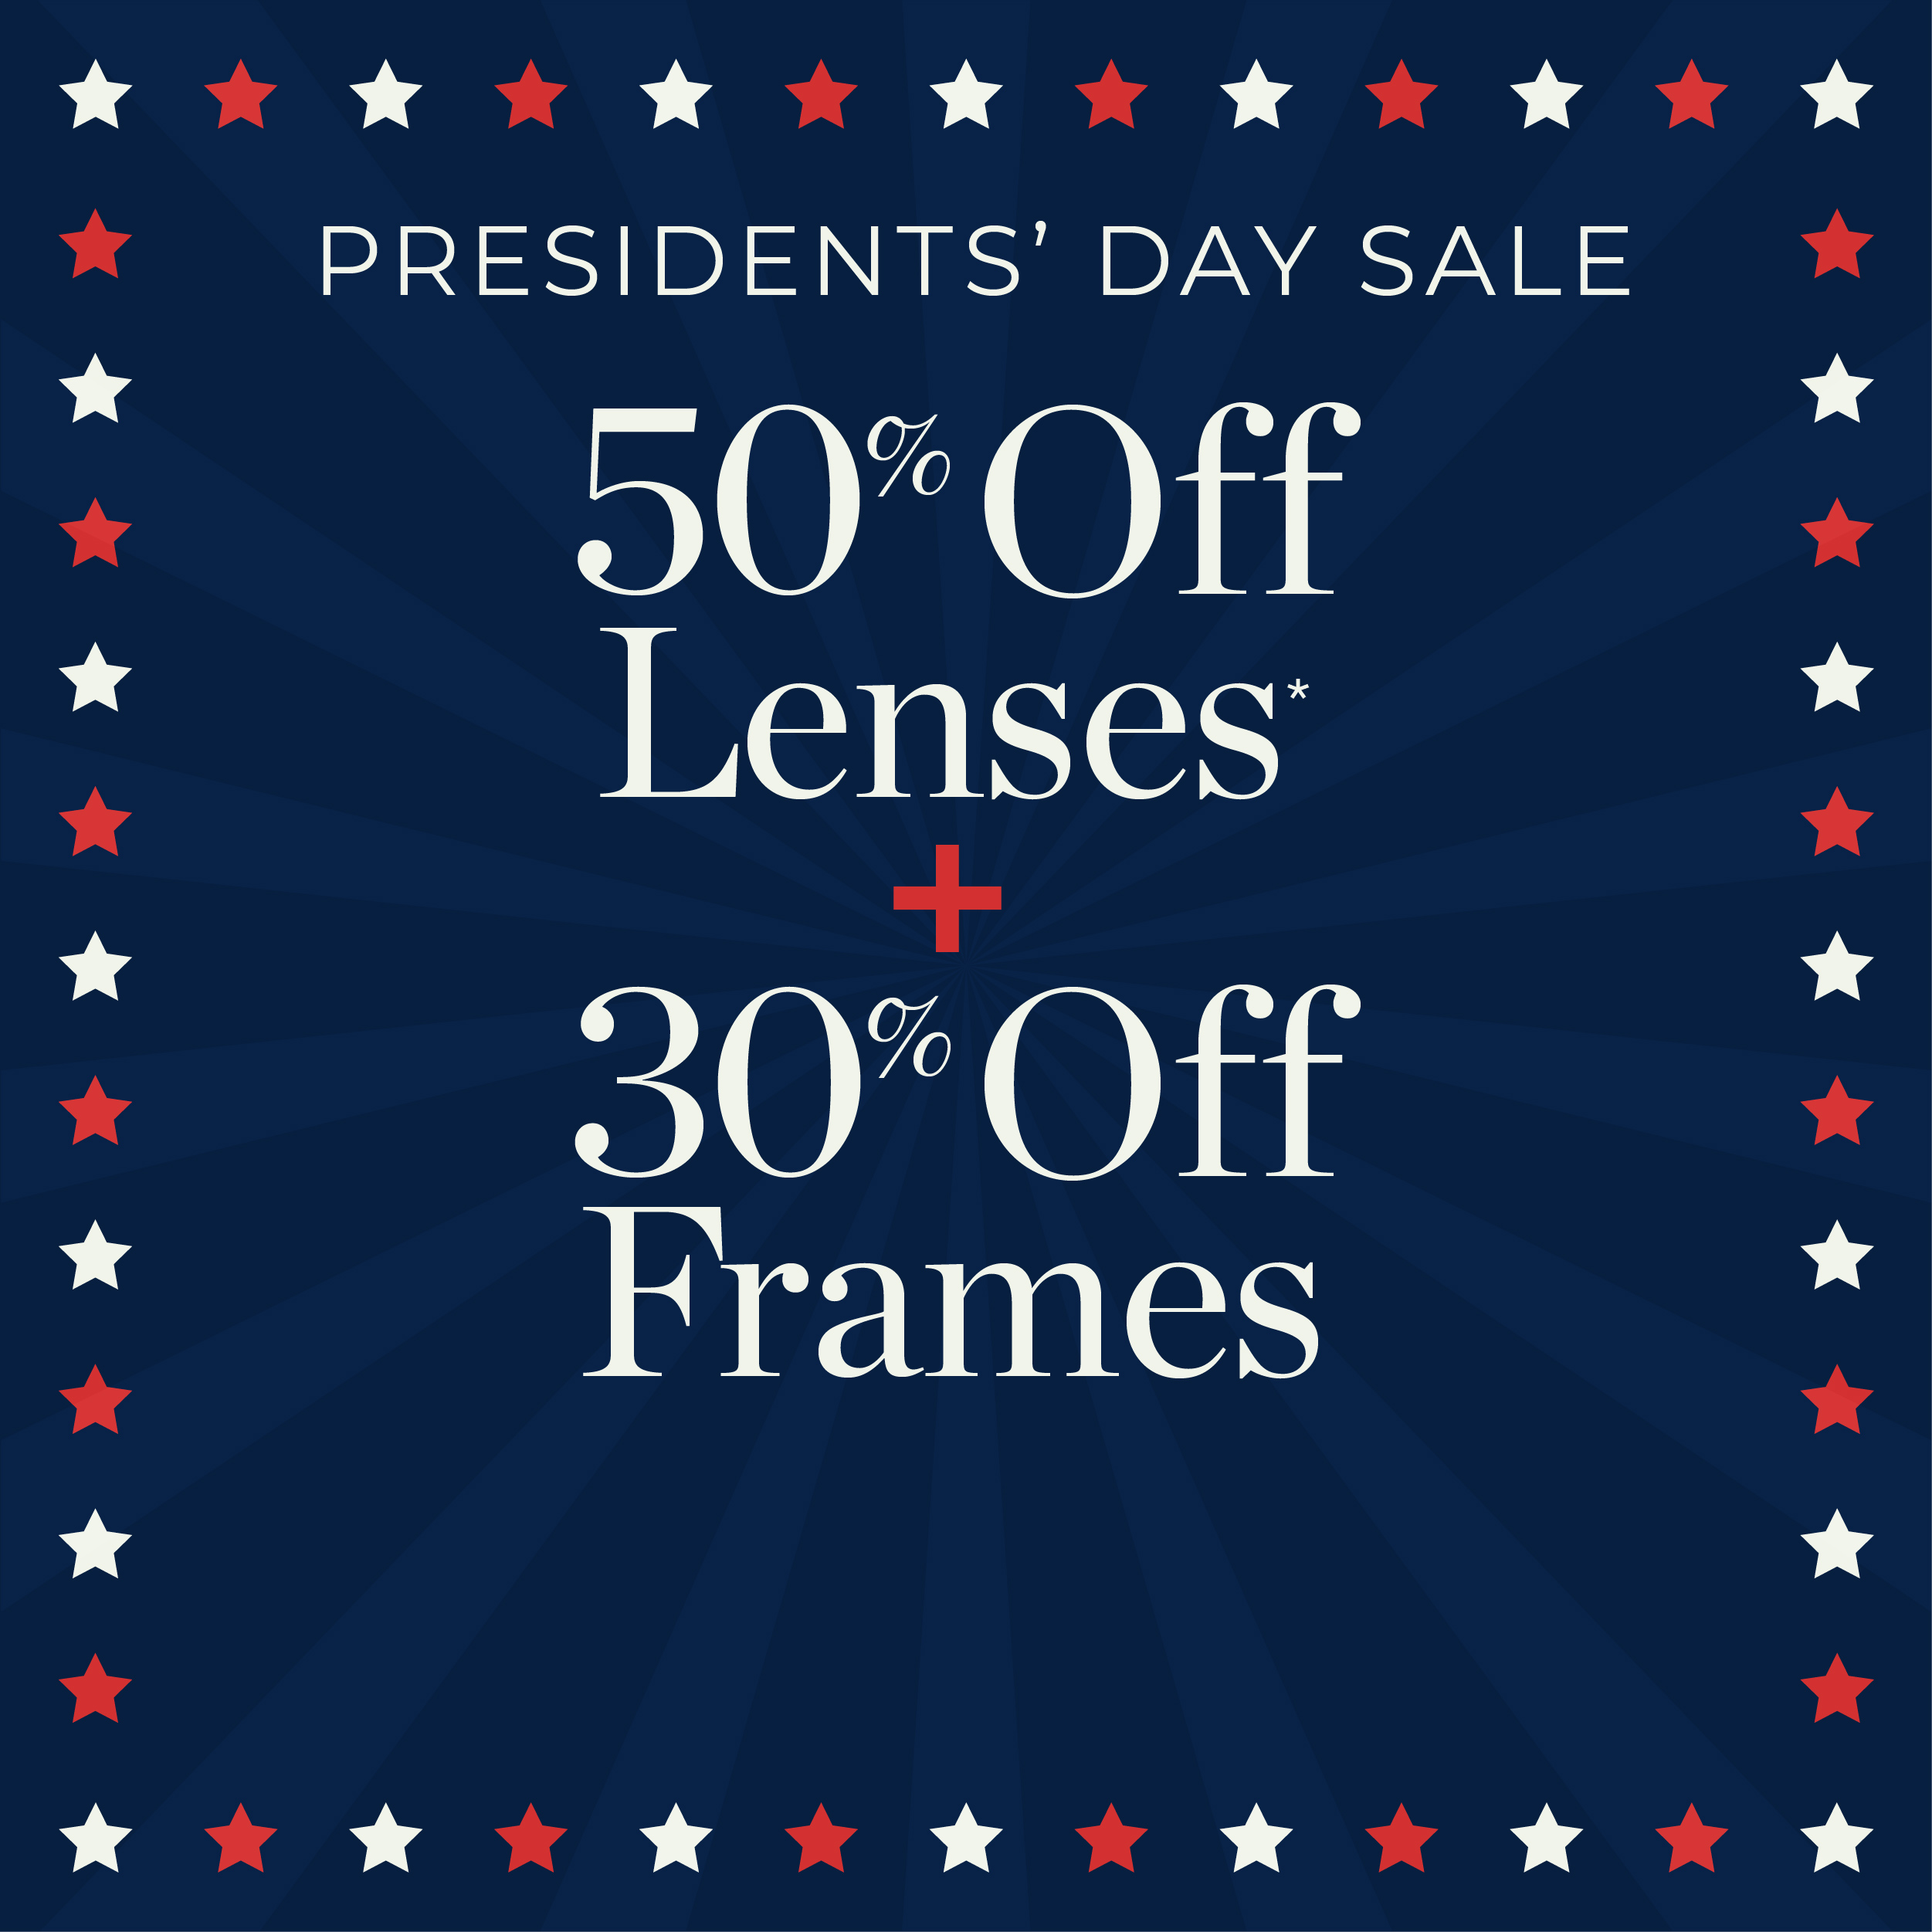 COHFOP 38220 42 Presidents Day Mall Assets 600x600